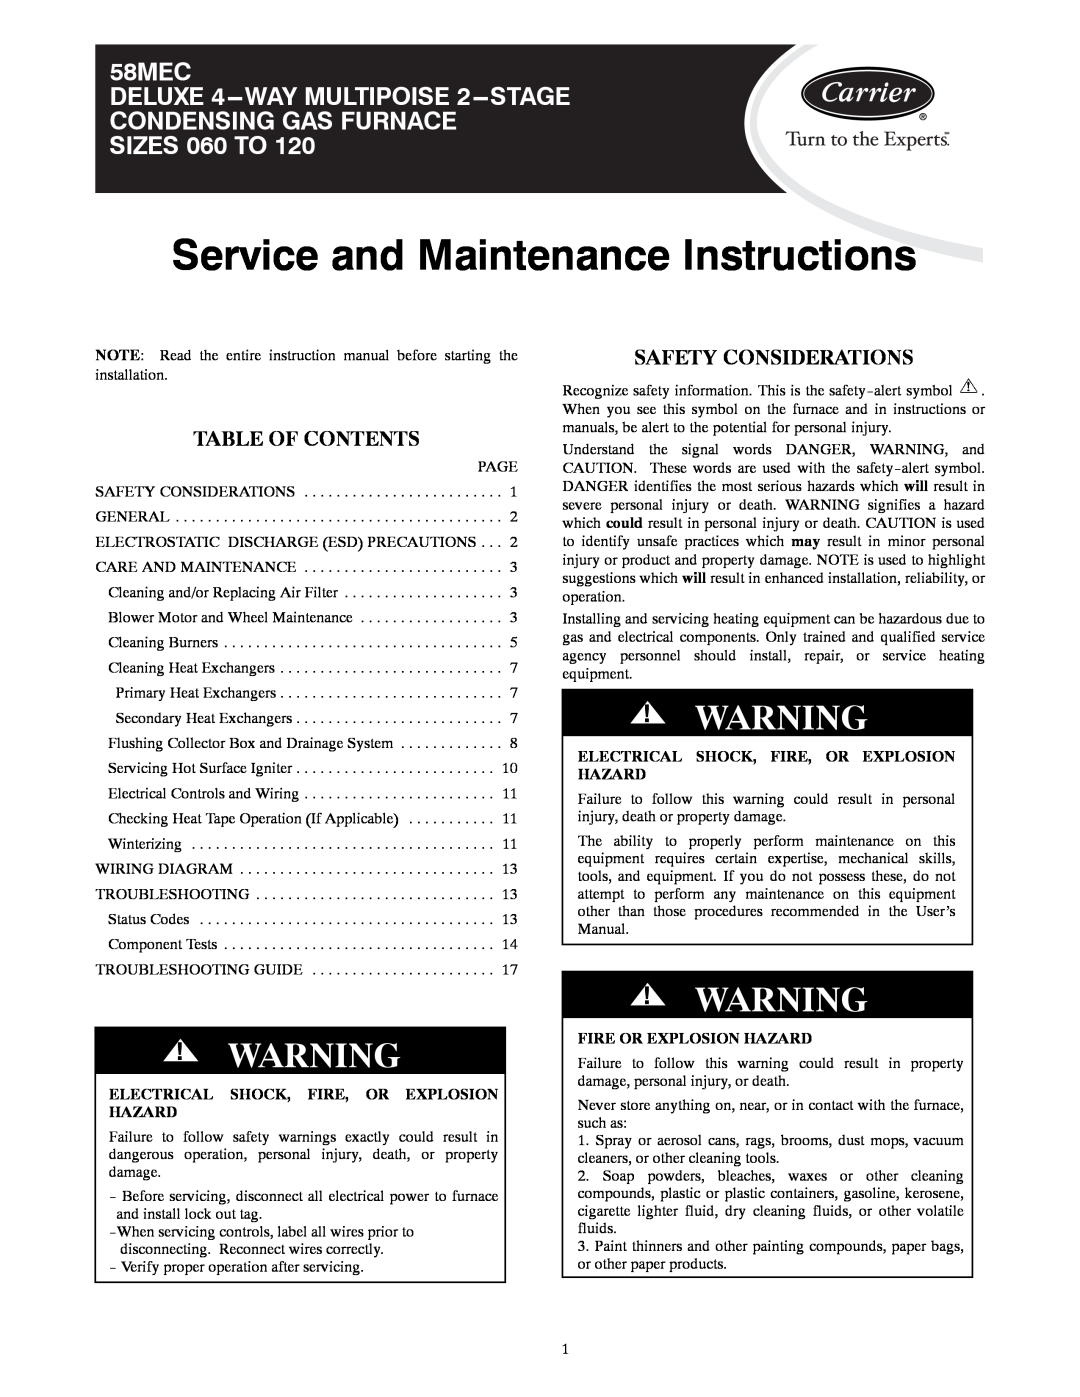 Carrier 58MEC instruction manual Table Of Contents, Safety Considerations, Electrical Shock, Fire, Or Explosion Hazard 